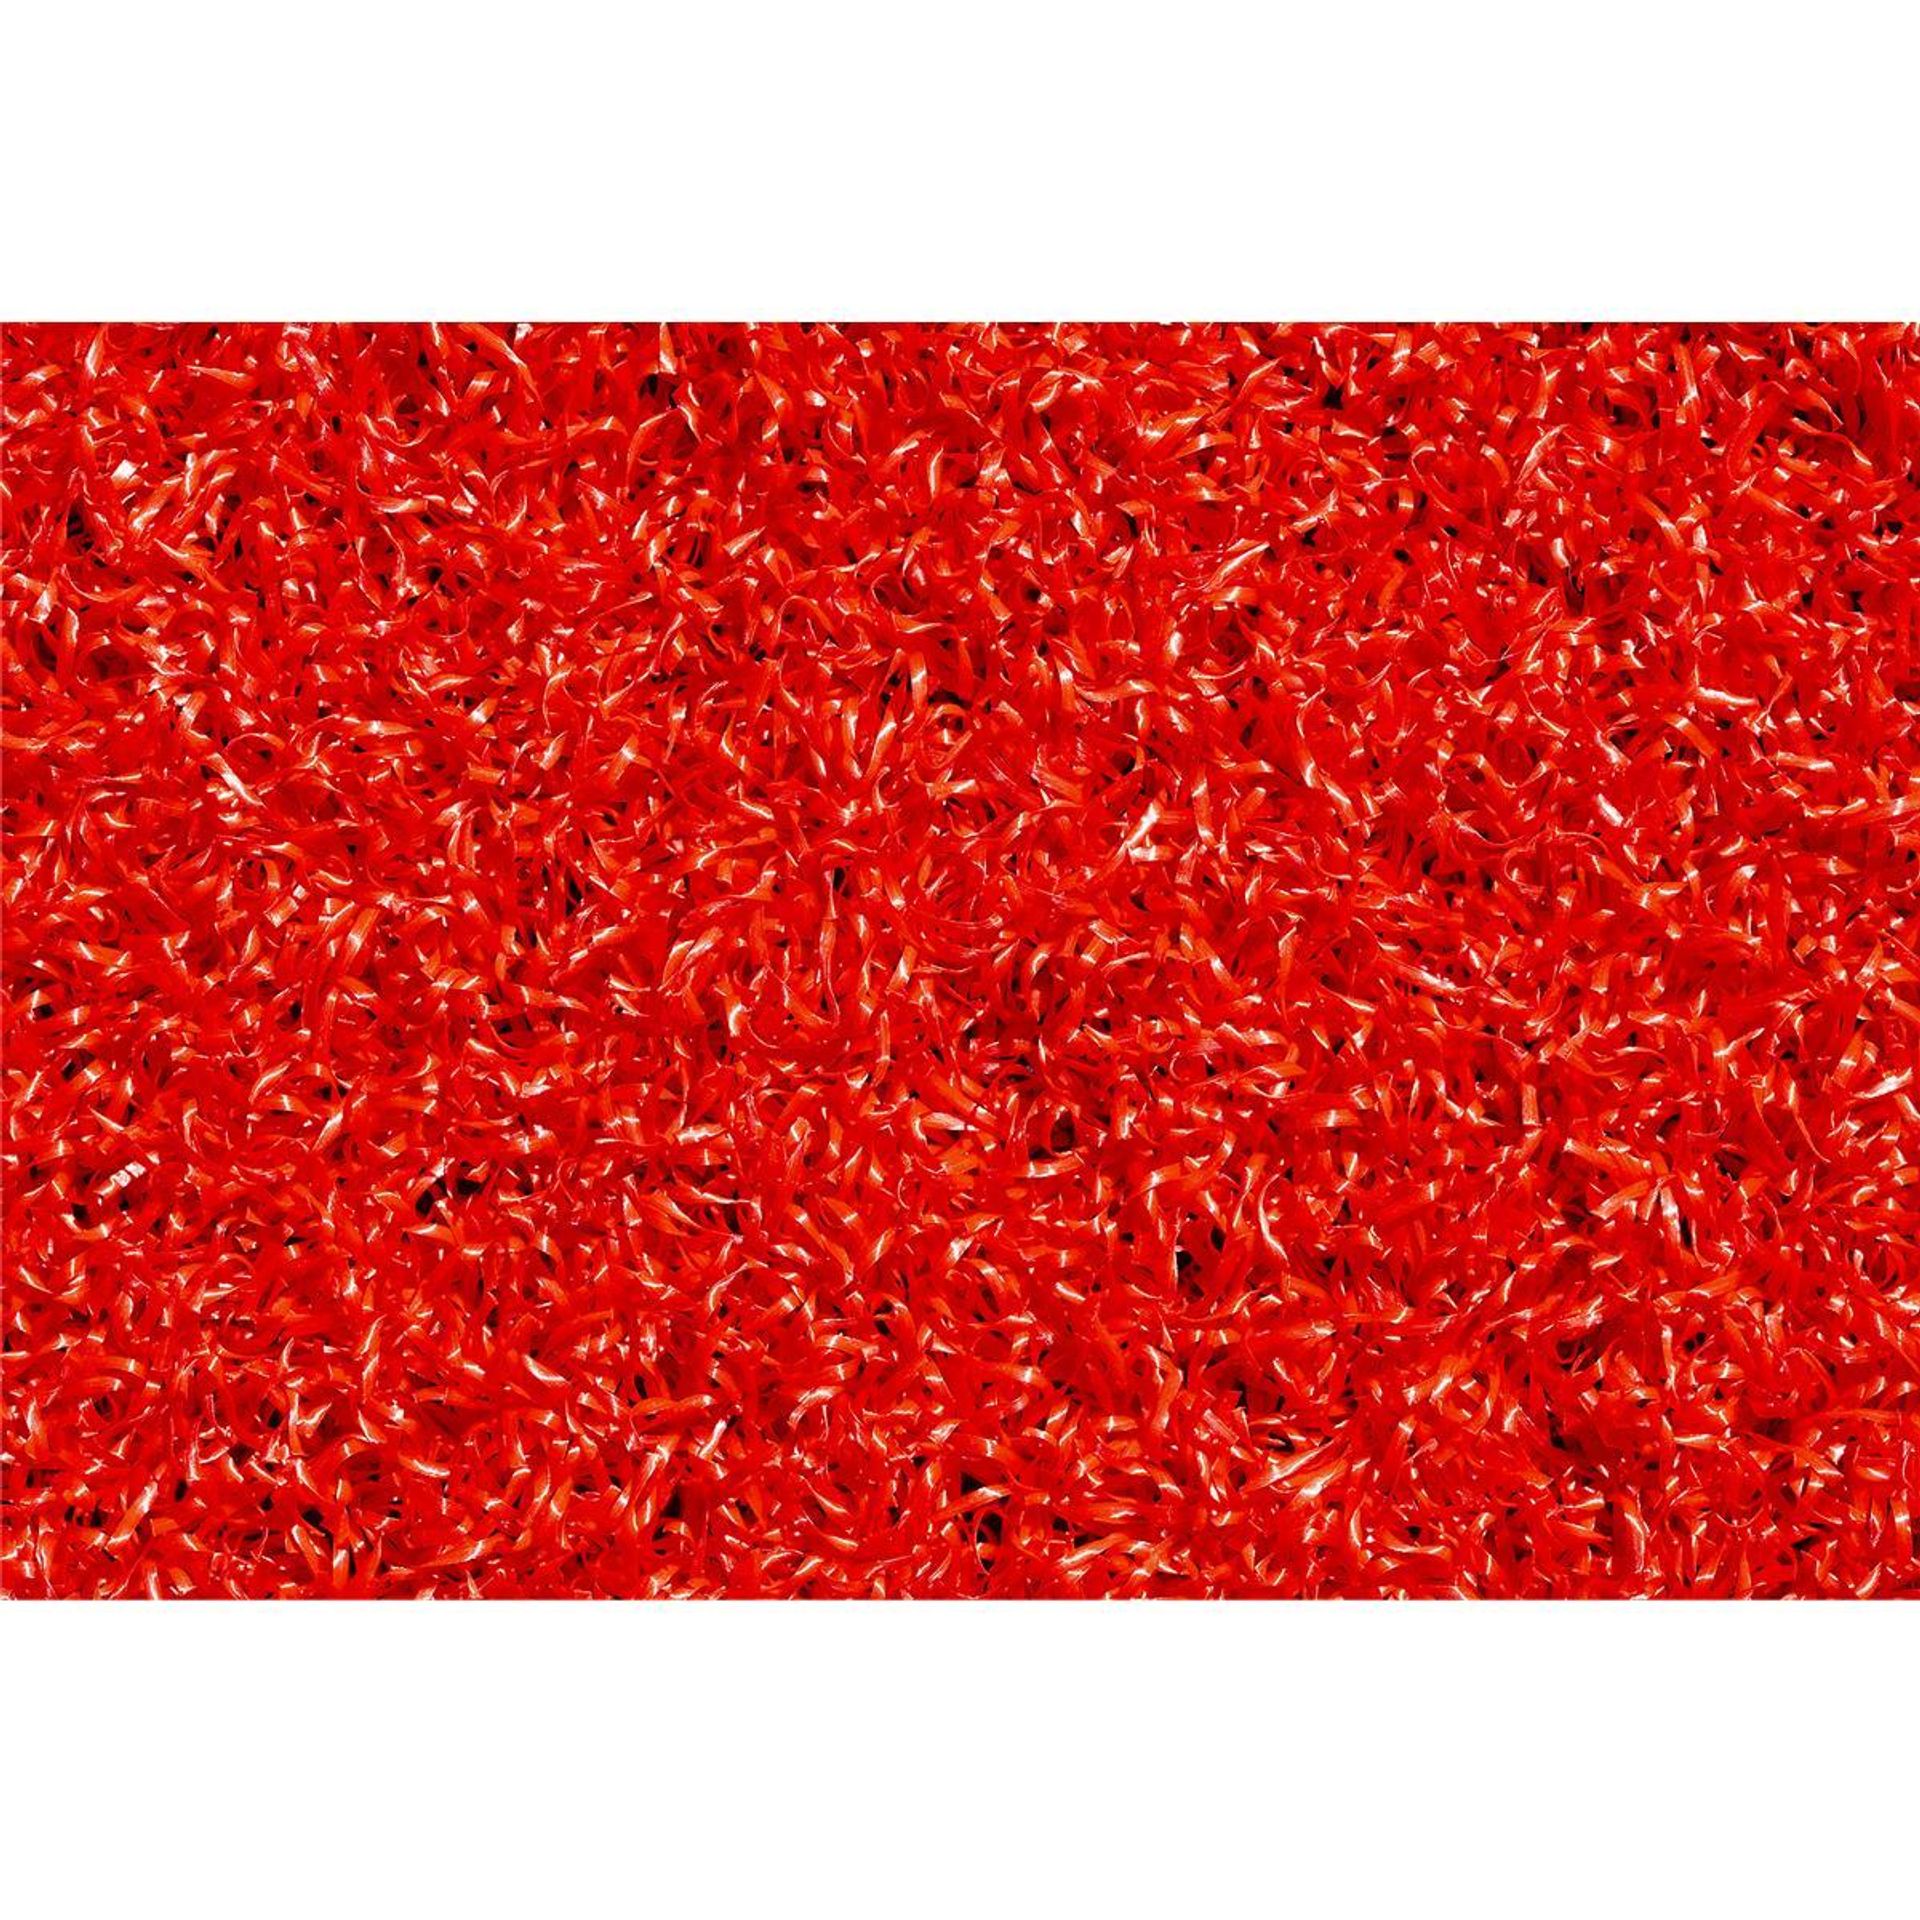 Kunstrasen 446 Colourful 001 red - Breite 200 cm - Couponbezug